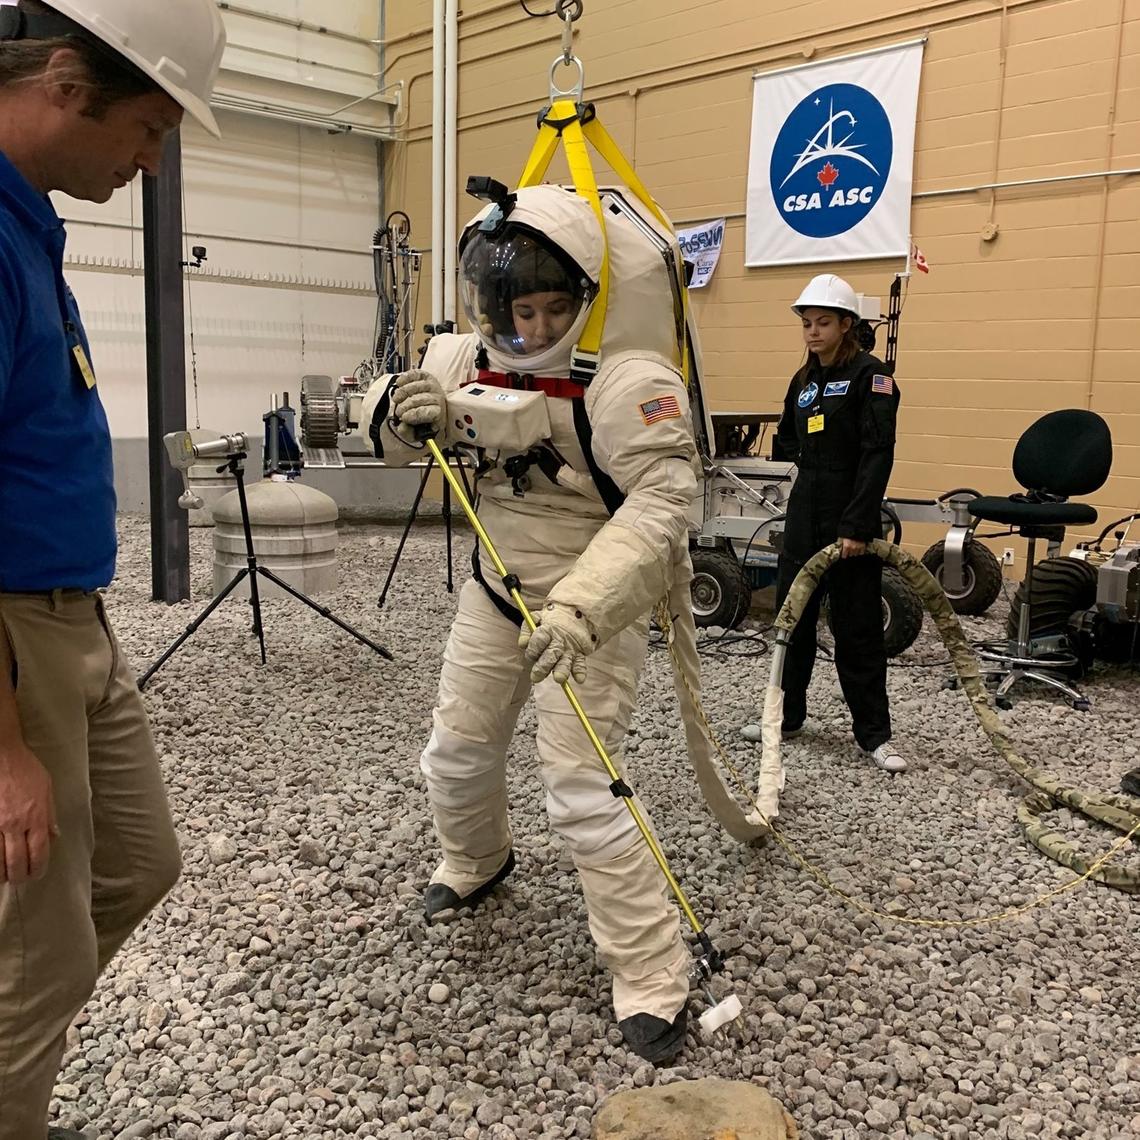 Nadia in Montreal, for extravehicular activity (EVA) training with the Canadian Space Agency (CSA)